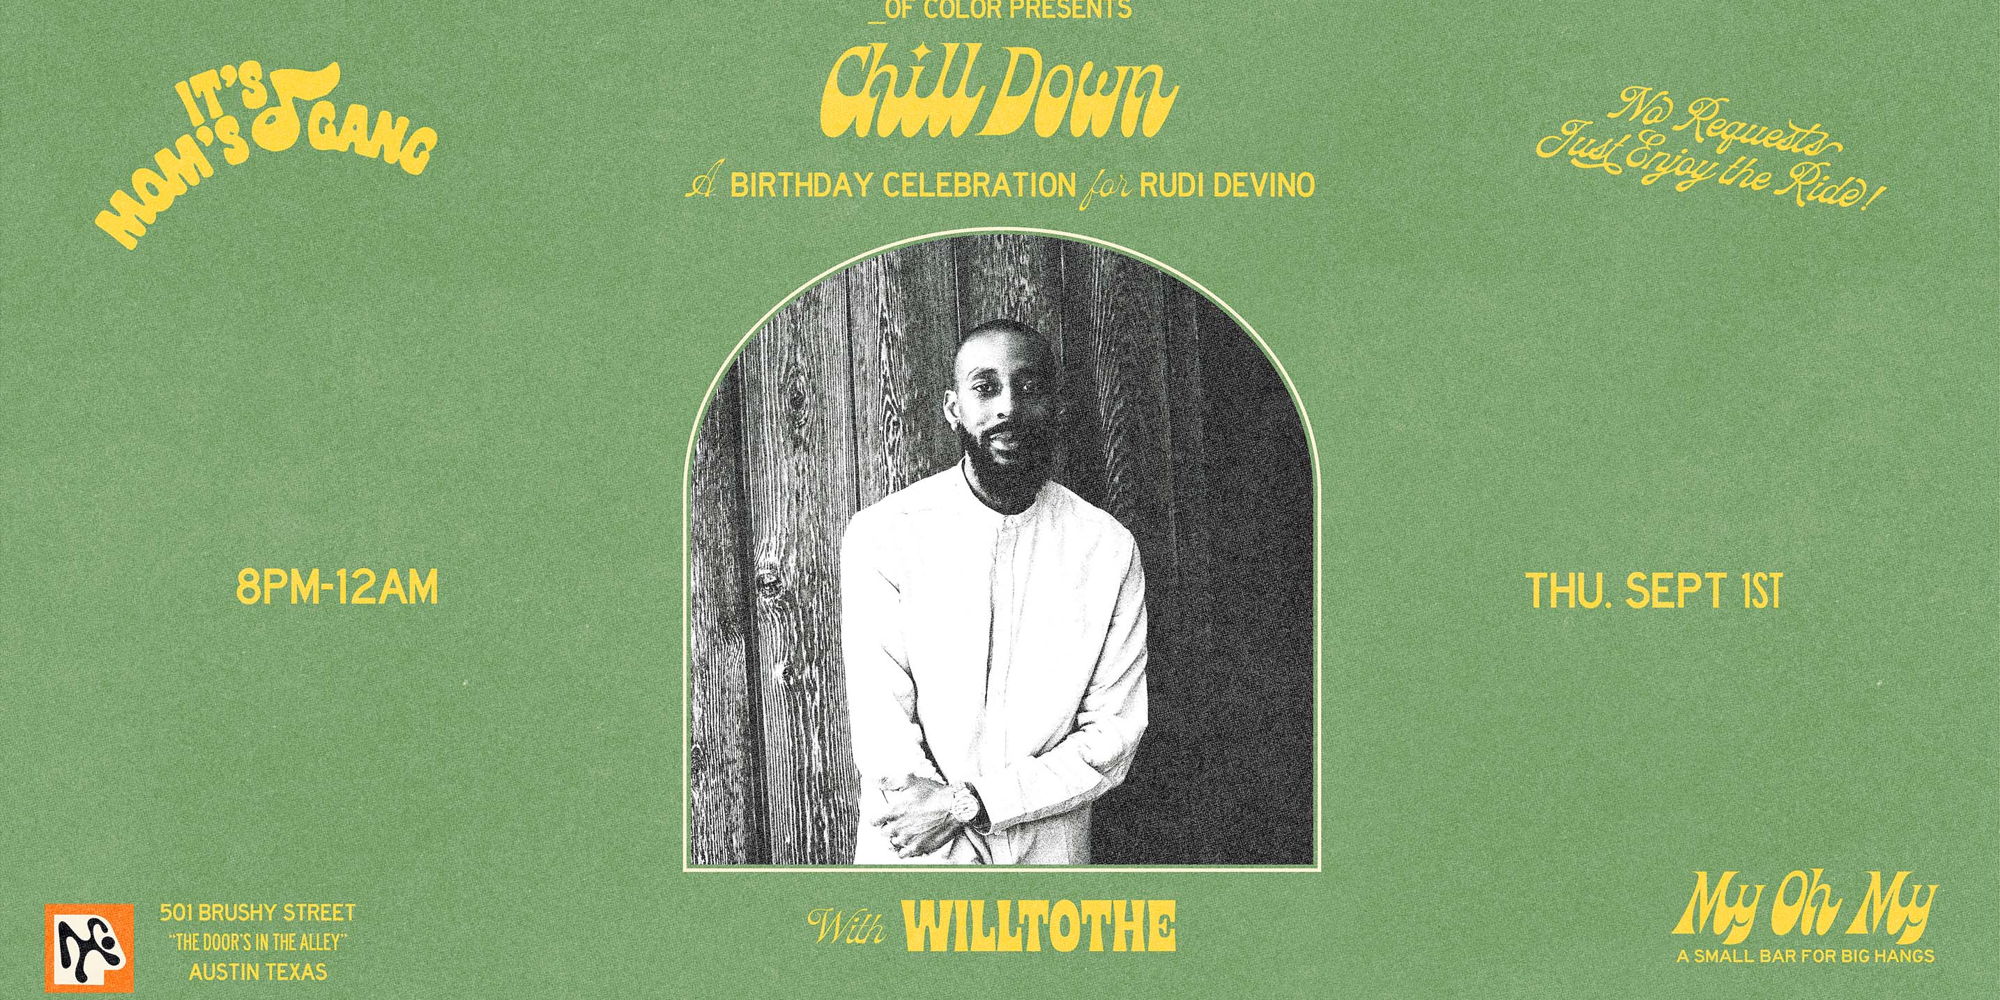 _OF COLOR Presents: CHILL DOWN w/ WILLTOTHE and Rudi Devino Birthday Celebration @ My Oh My on 9/1 promotional image